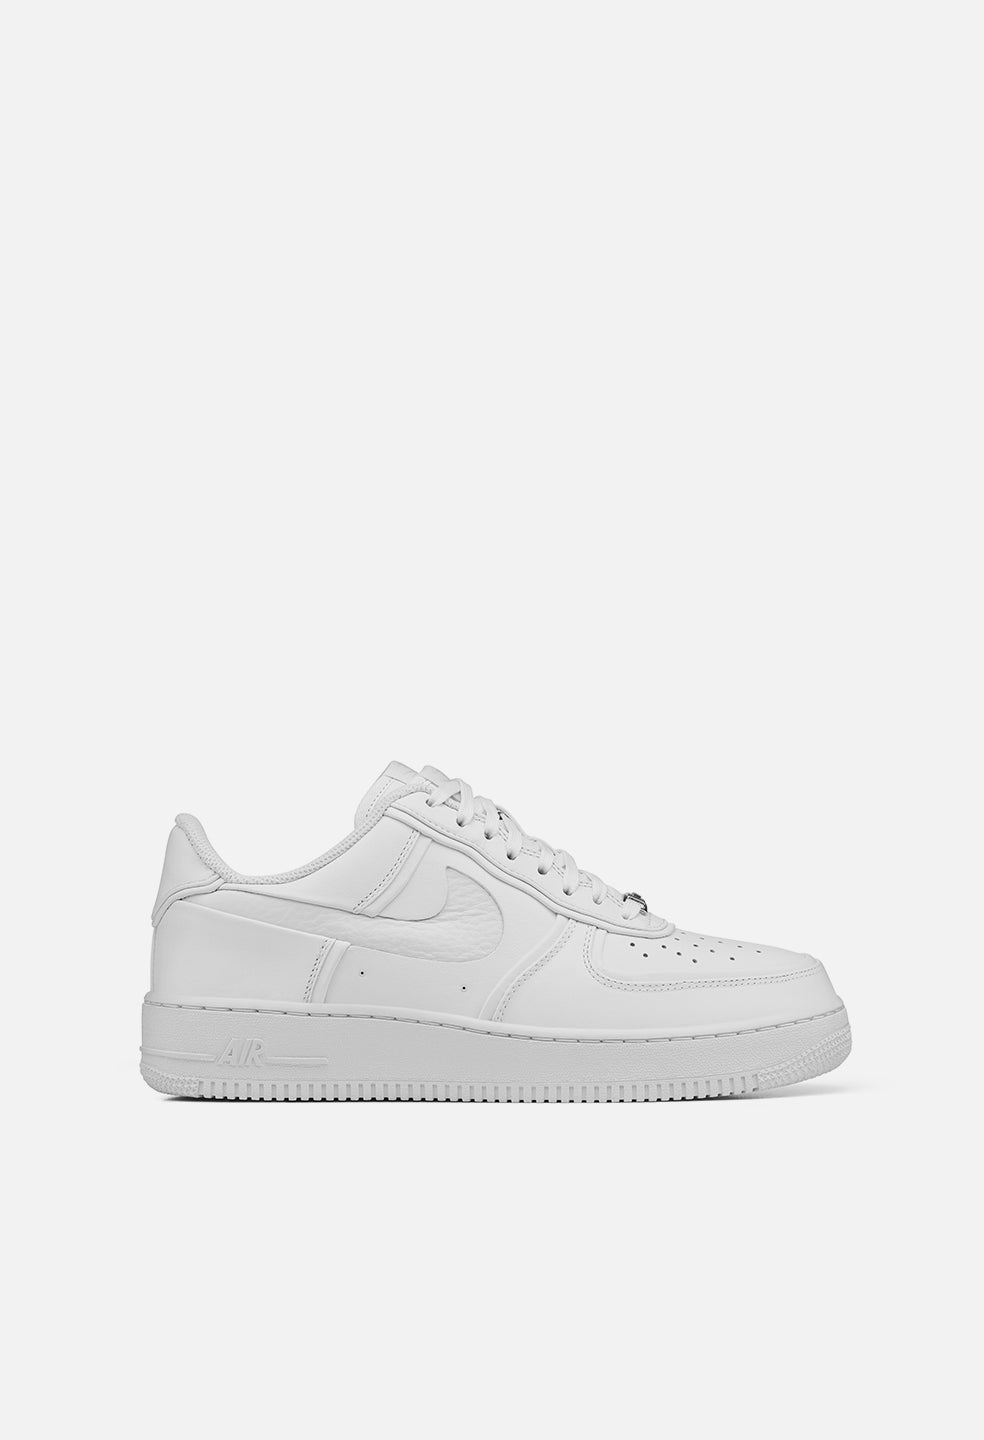 do nike air force 1 fit true to size